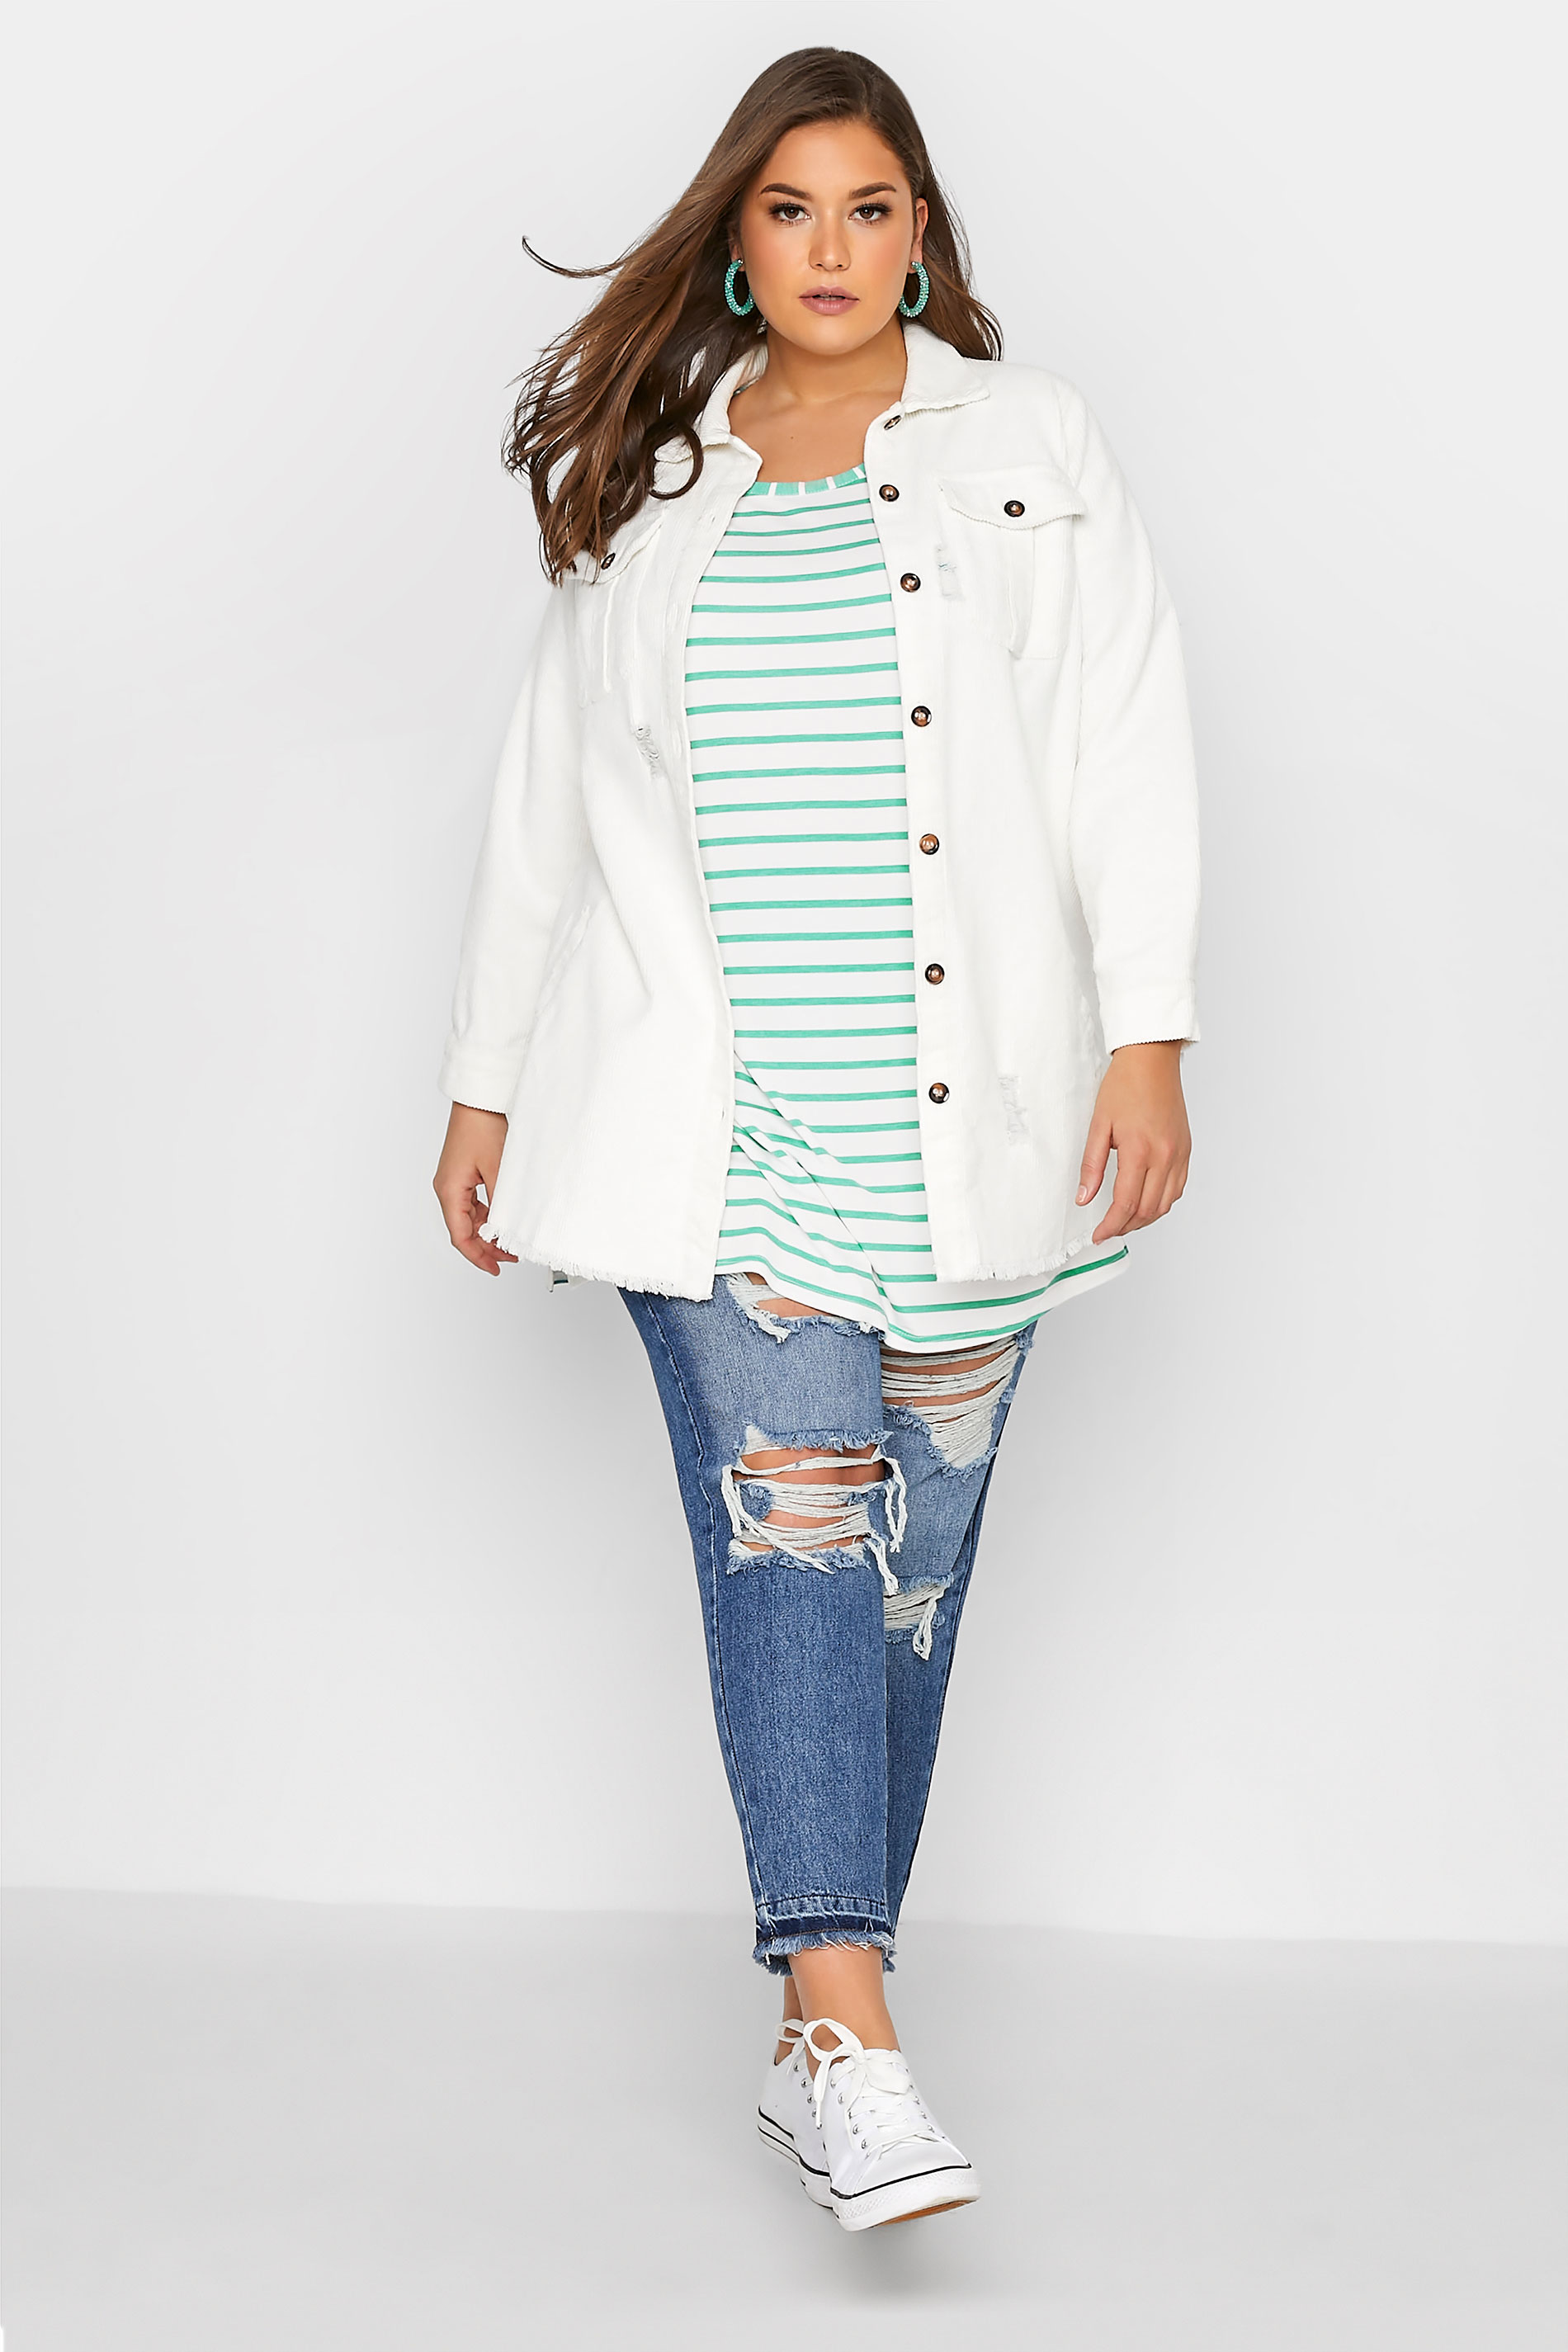 Grande taille  Tops Grande taille  Tops Casual | LIMITED COLLECTION - T-Shirt Oversize Vert & Blanc à Rayures - WQ69704